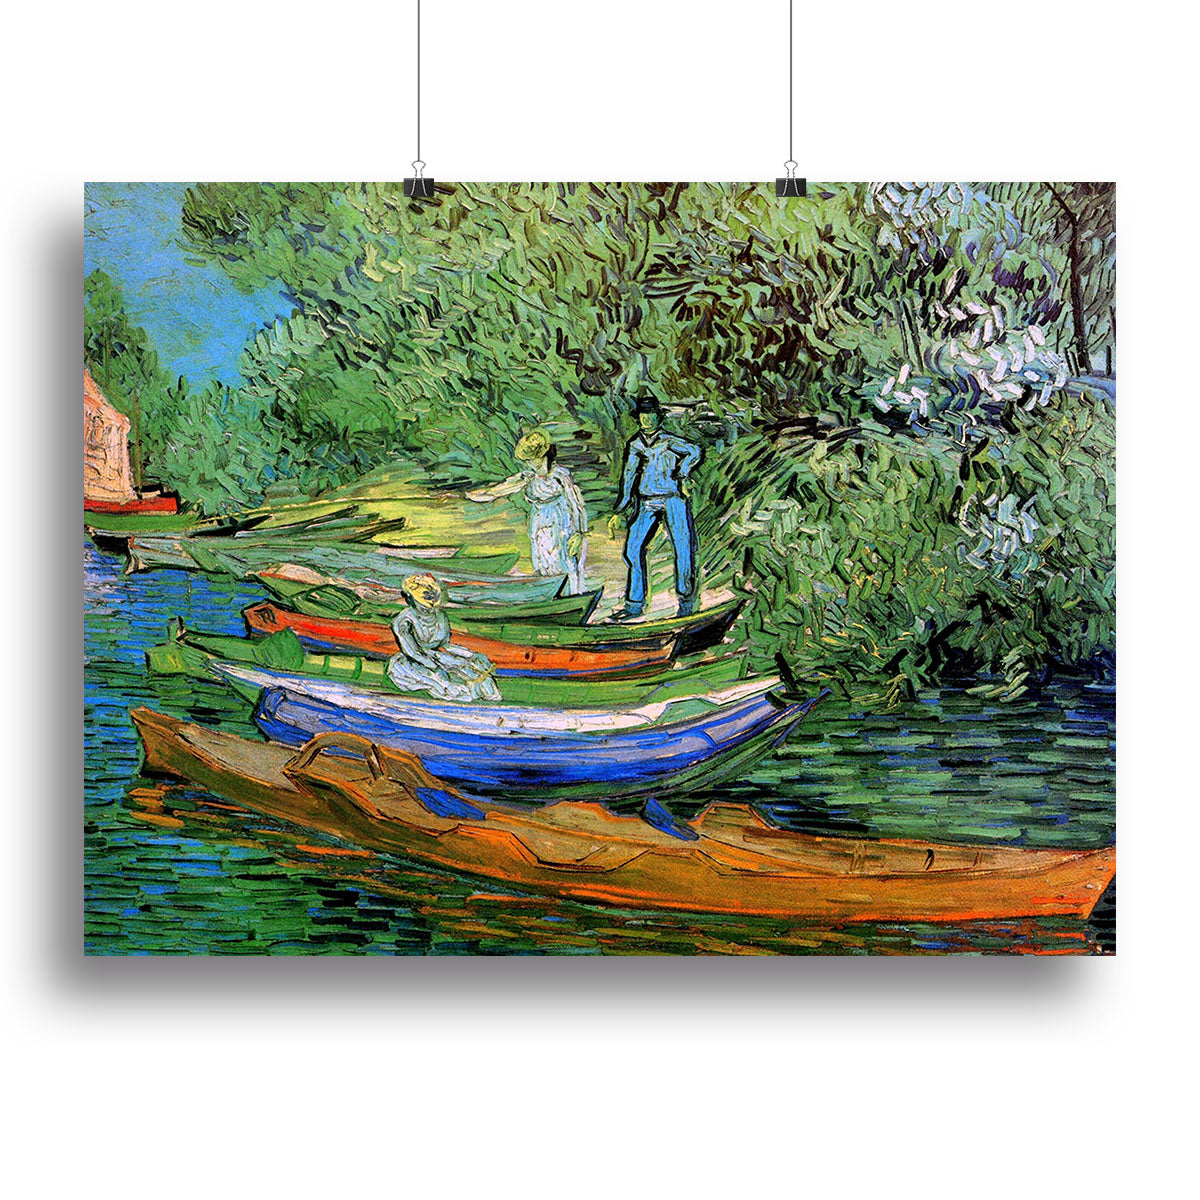 Bank of the Oise at Auvers by Van Gogh Canvas Print or Poster - Canvas Art Rocks - 2